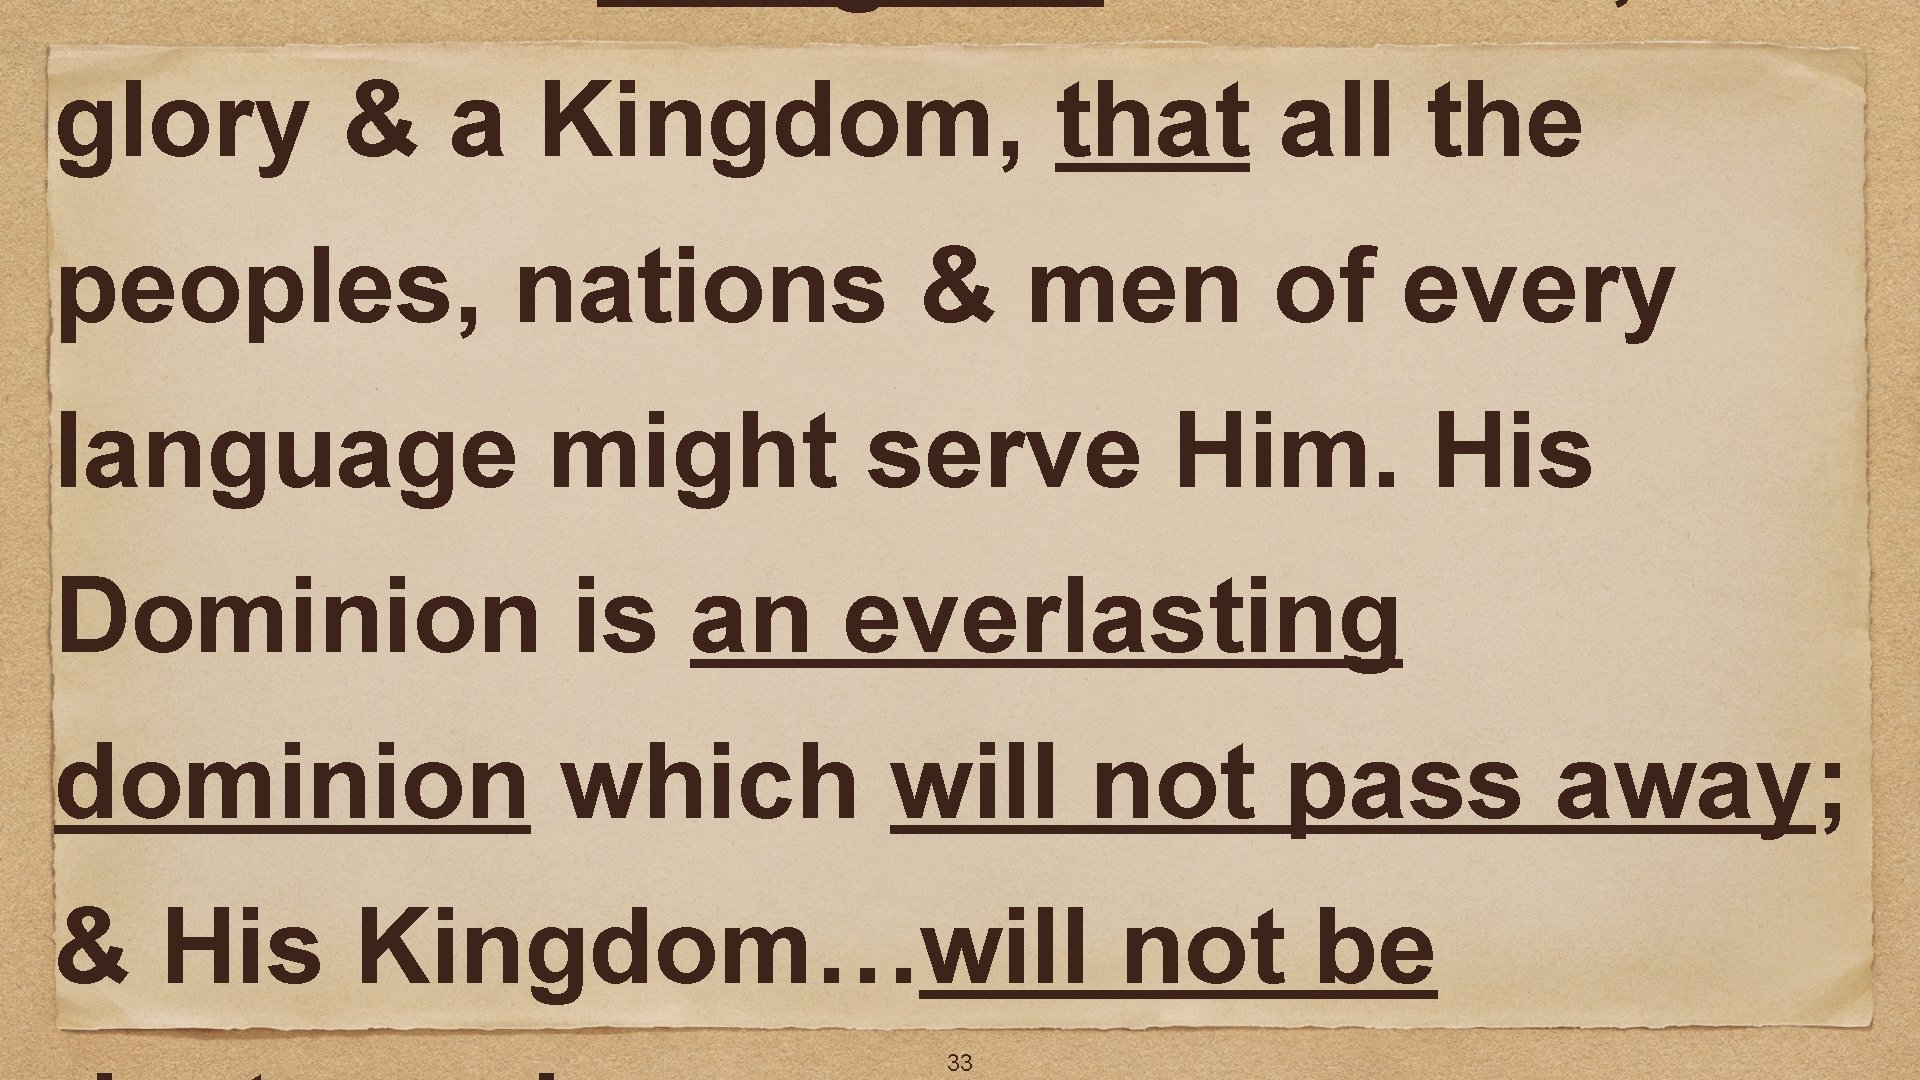 glory & a Kingdom, that all the peoples, nations & men of every language